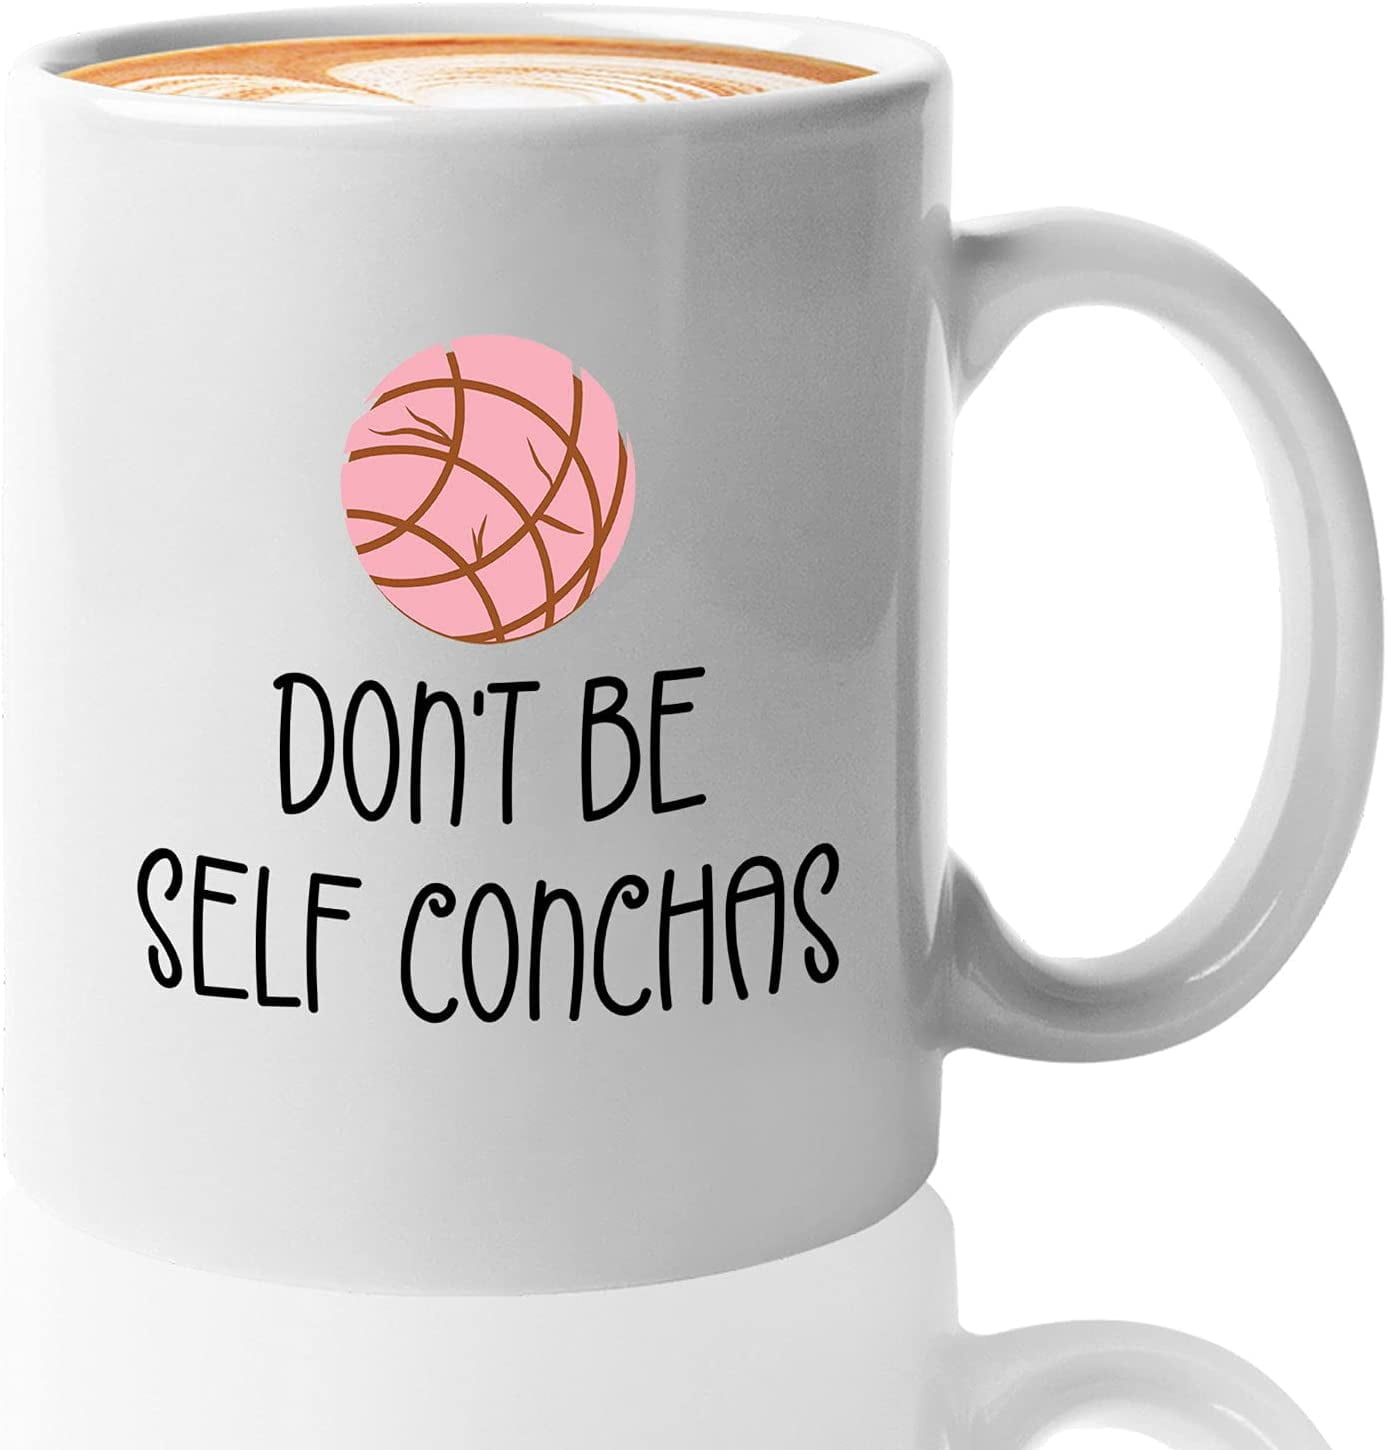 10oz Stainless Steal Coffee Cup - Rainbow Concha - Dont Be Self